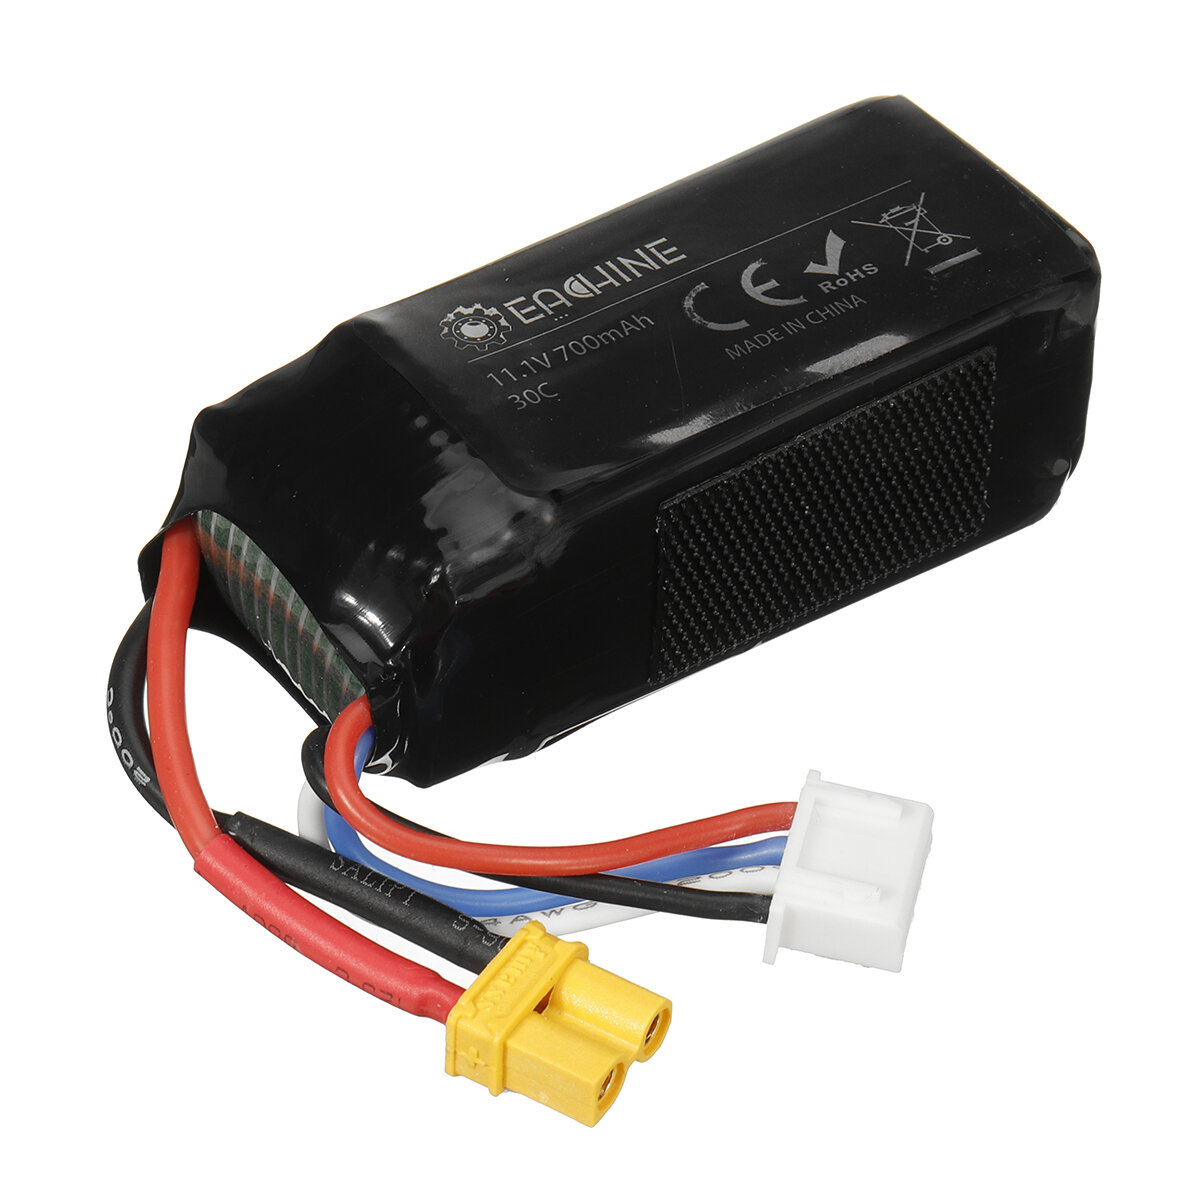 Eachine E180 11.1V 700mAh 30C Lipo Battery RC Helicopter Spare Parts